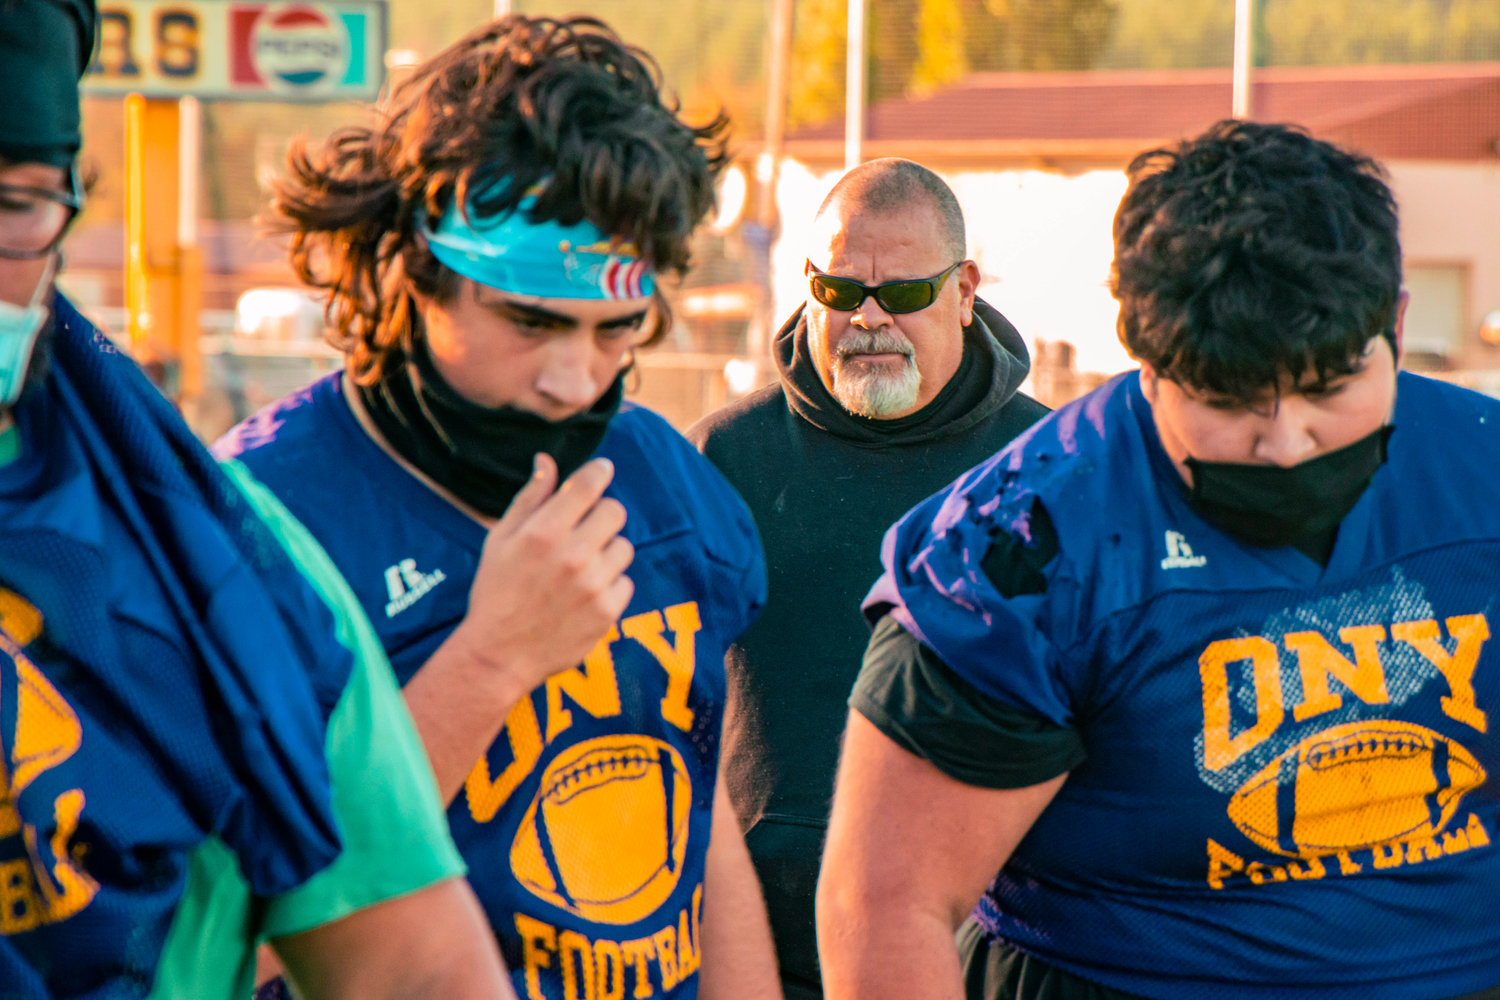 Coach Wayne Nelson looks on while players adjusts facemasks during practice on Monday at Onalaska High School.